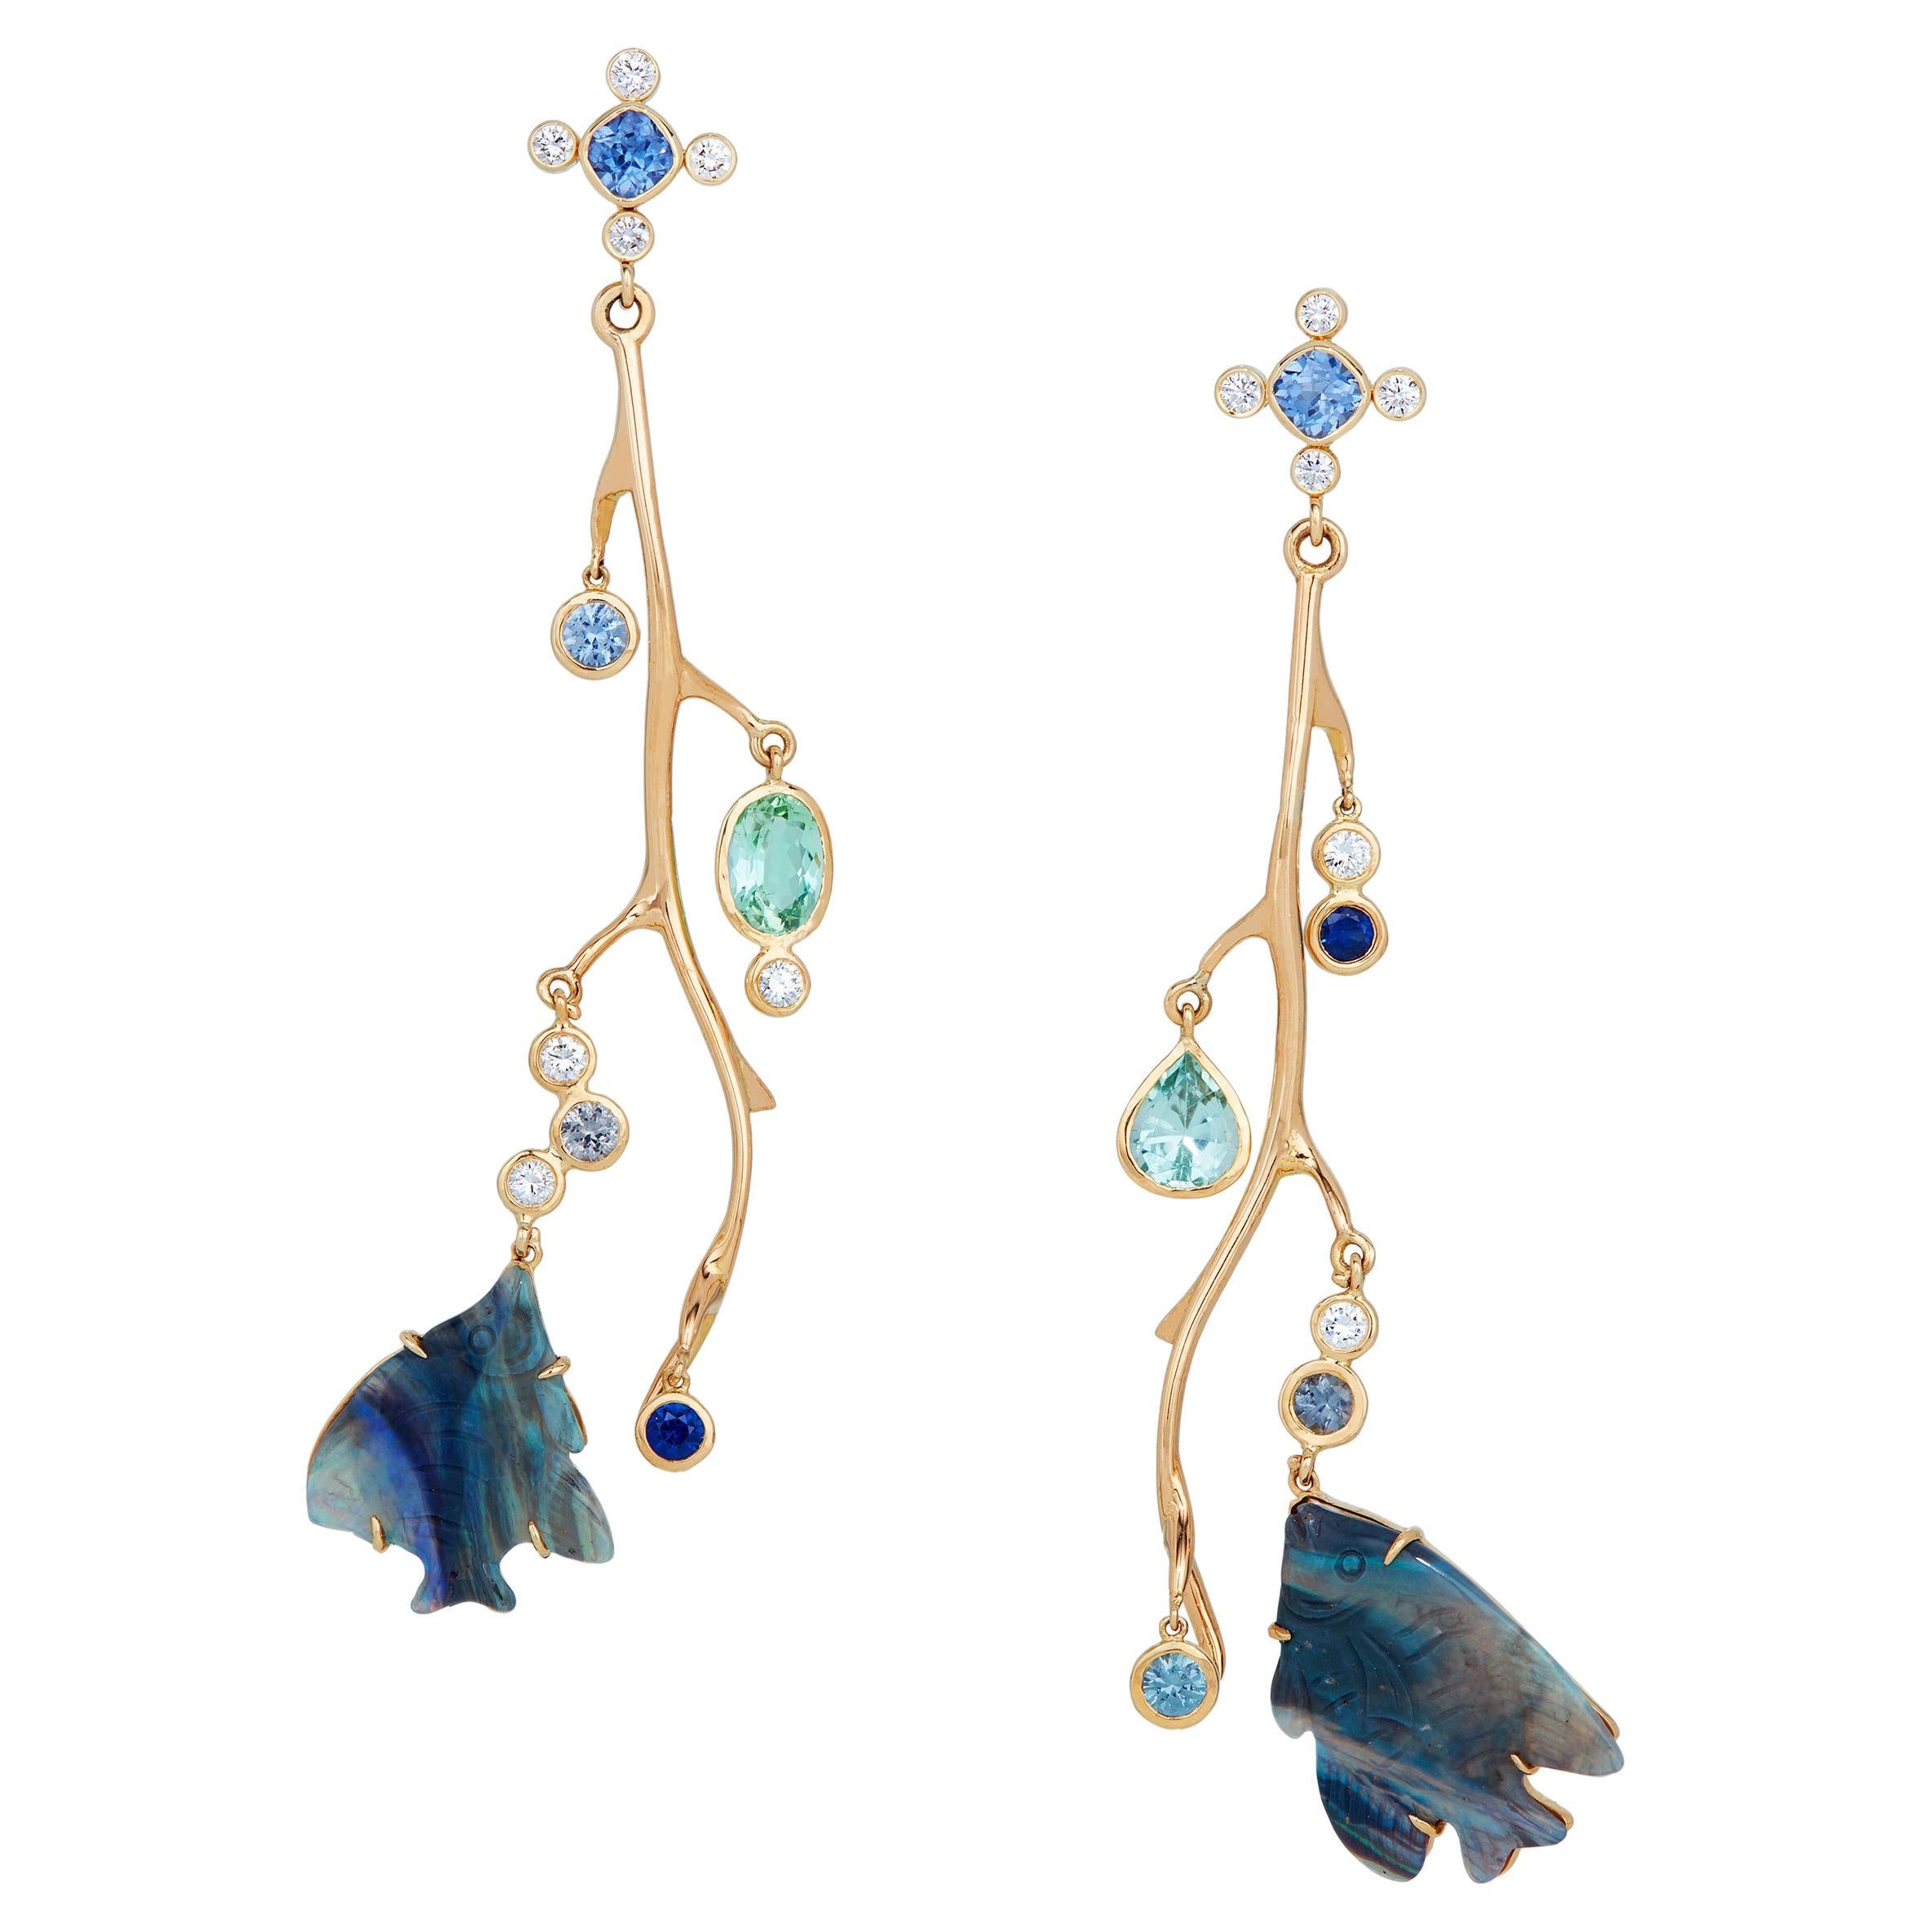 AGL 6.61 Carats Boulder Opal Fish with 4.59 Carats Diamond and Gem Earrings 18K For Sale